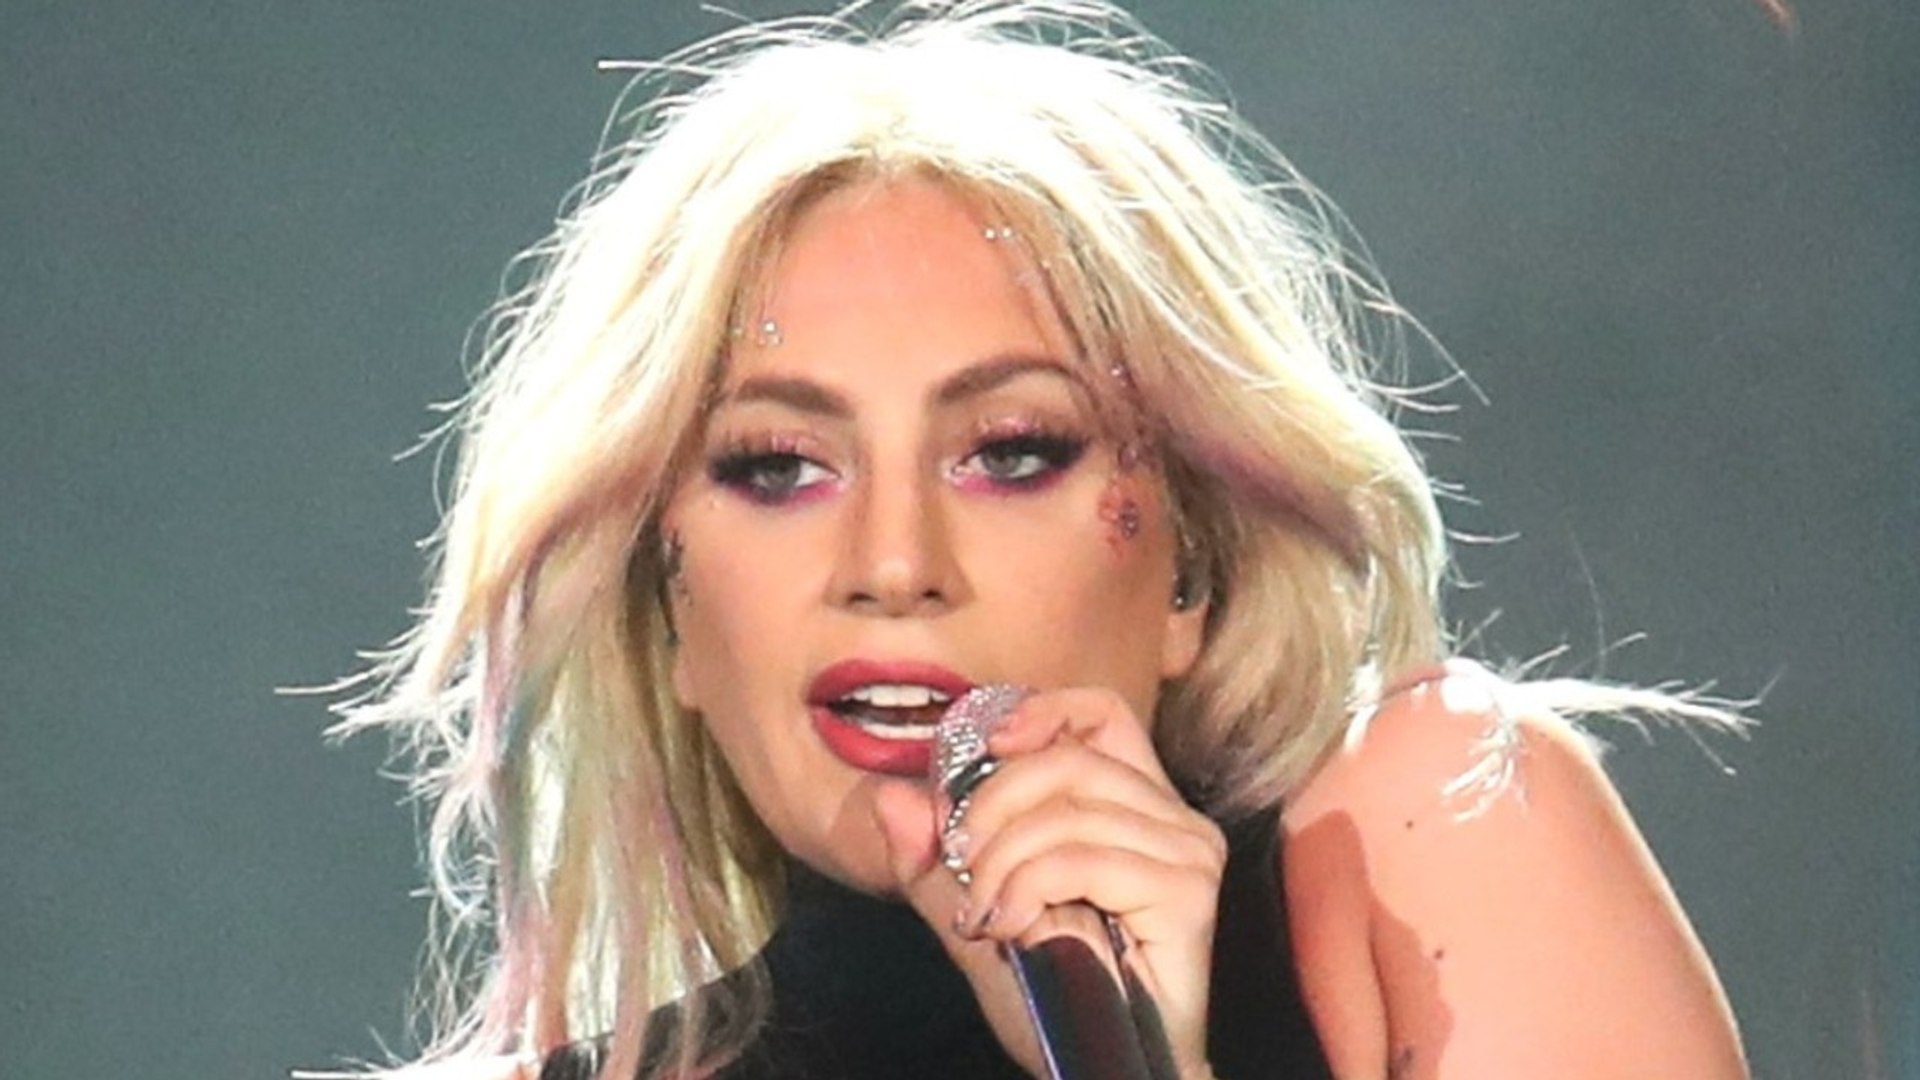 Lady Gaga Scolds Fans For Hateful Online Bullying